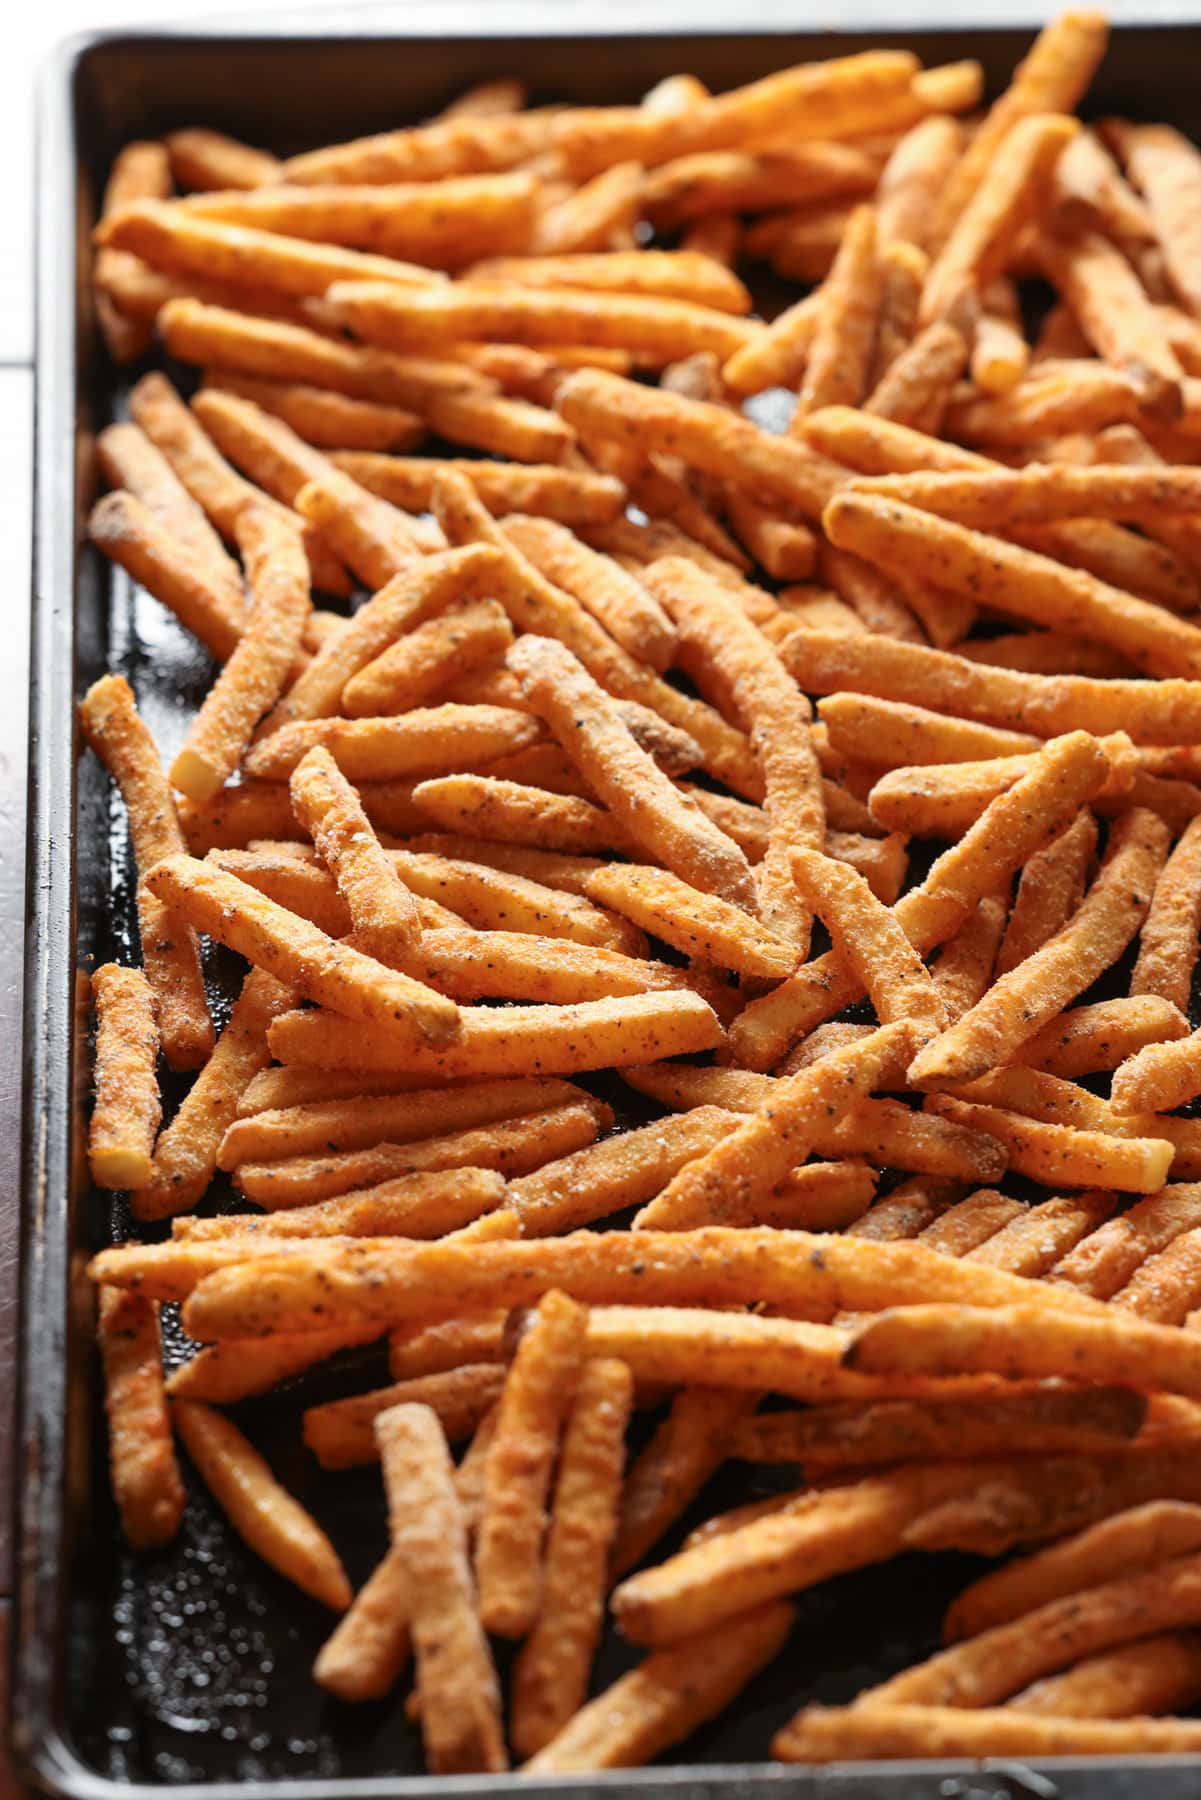 frozen french fries on a baking sheet